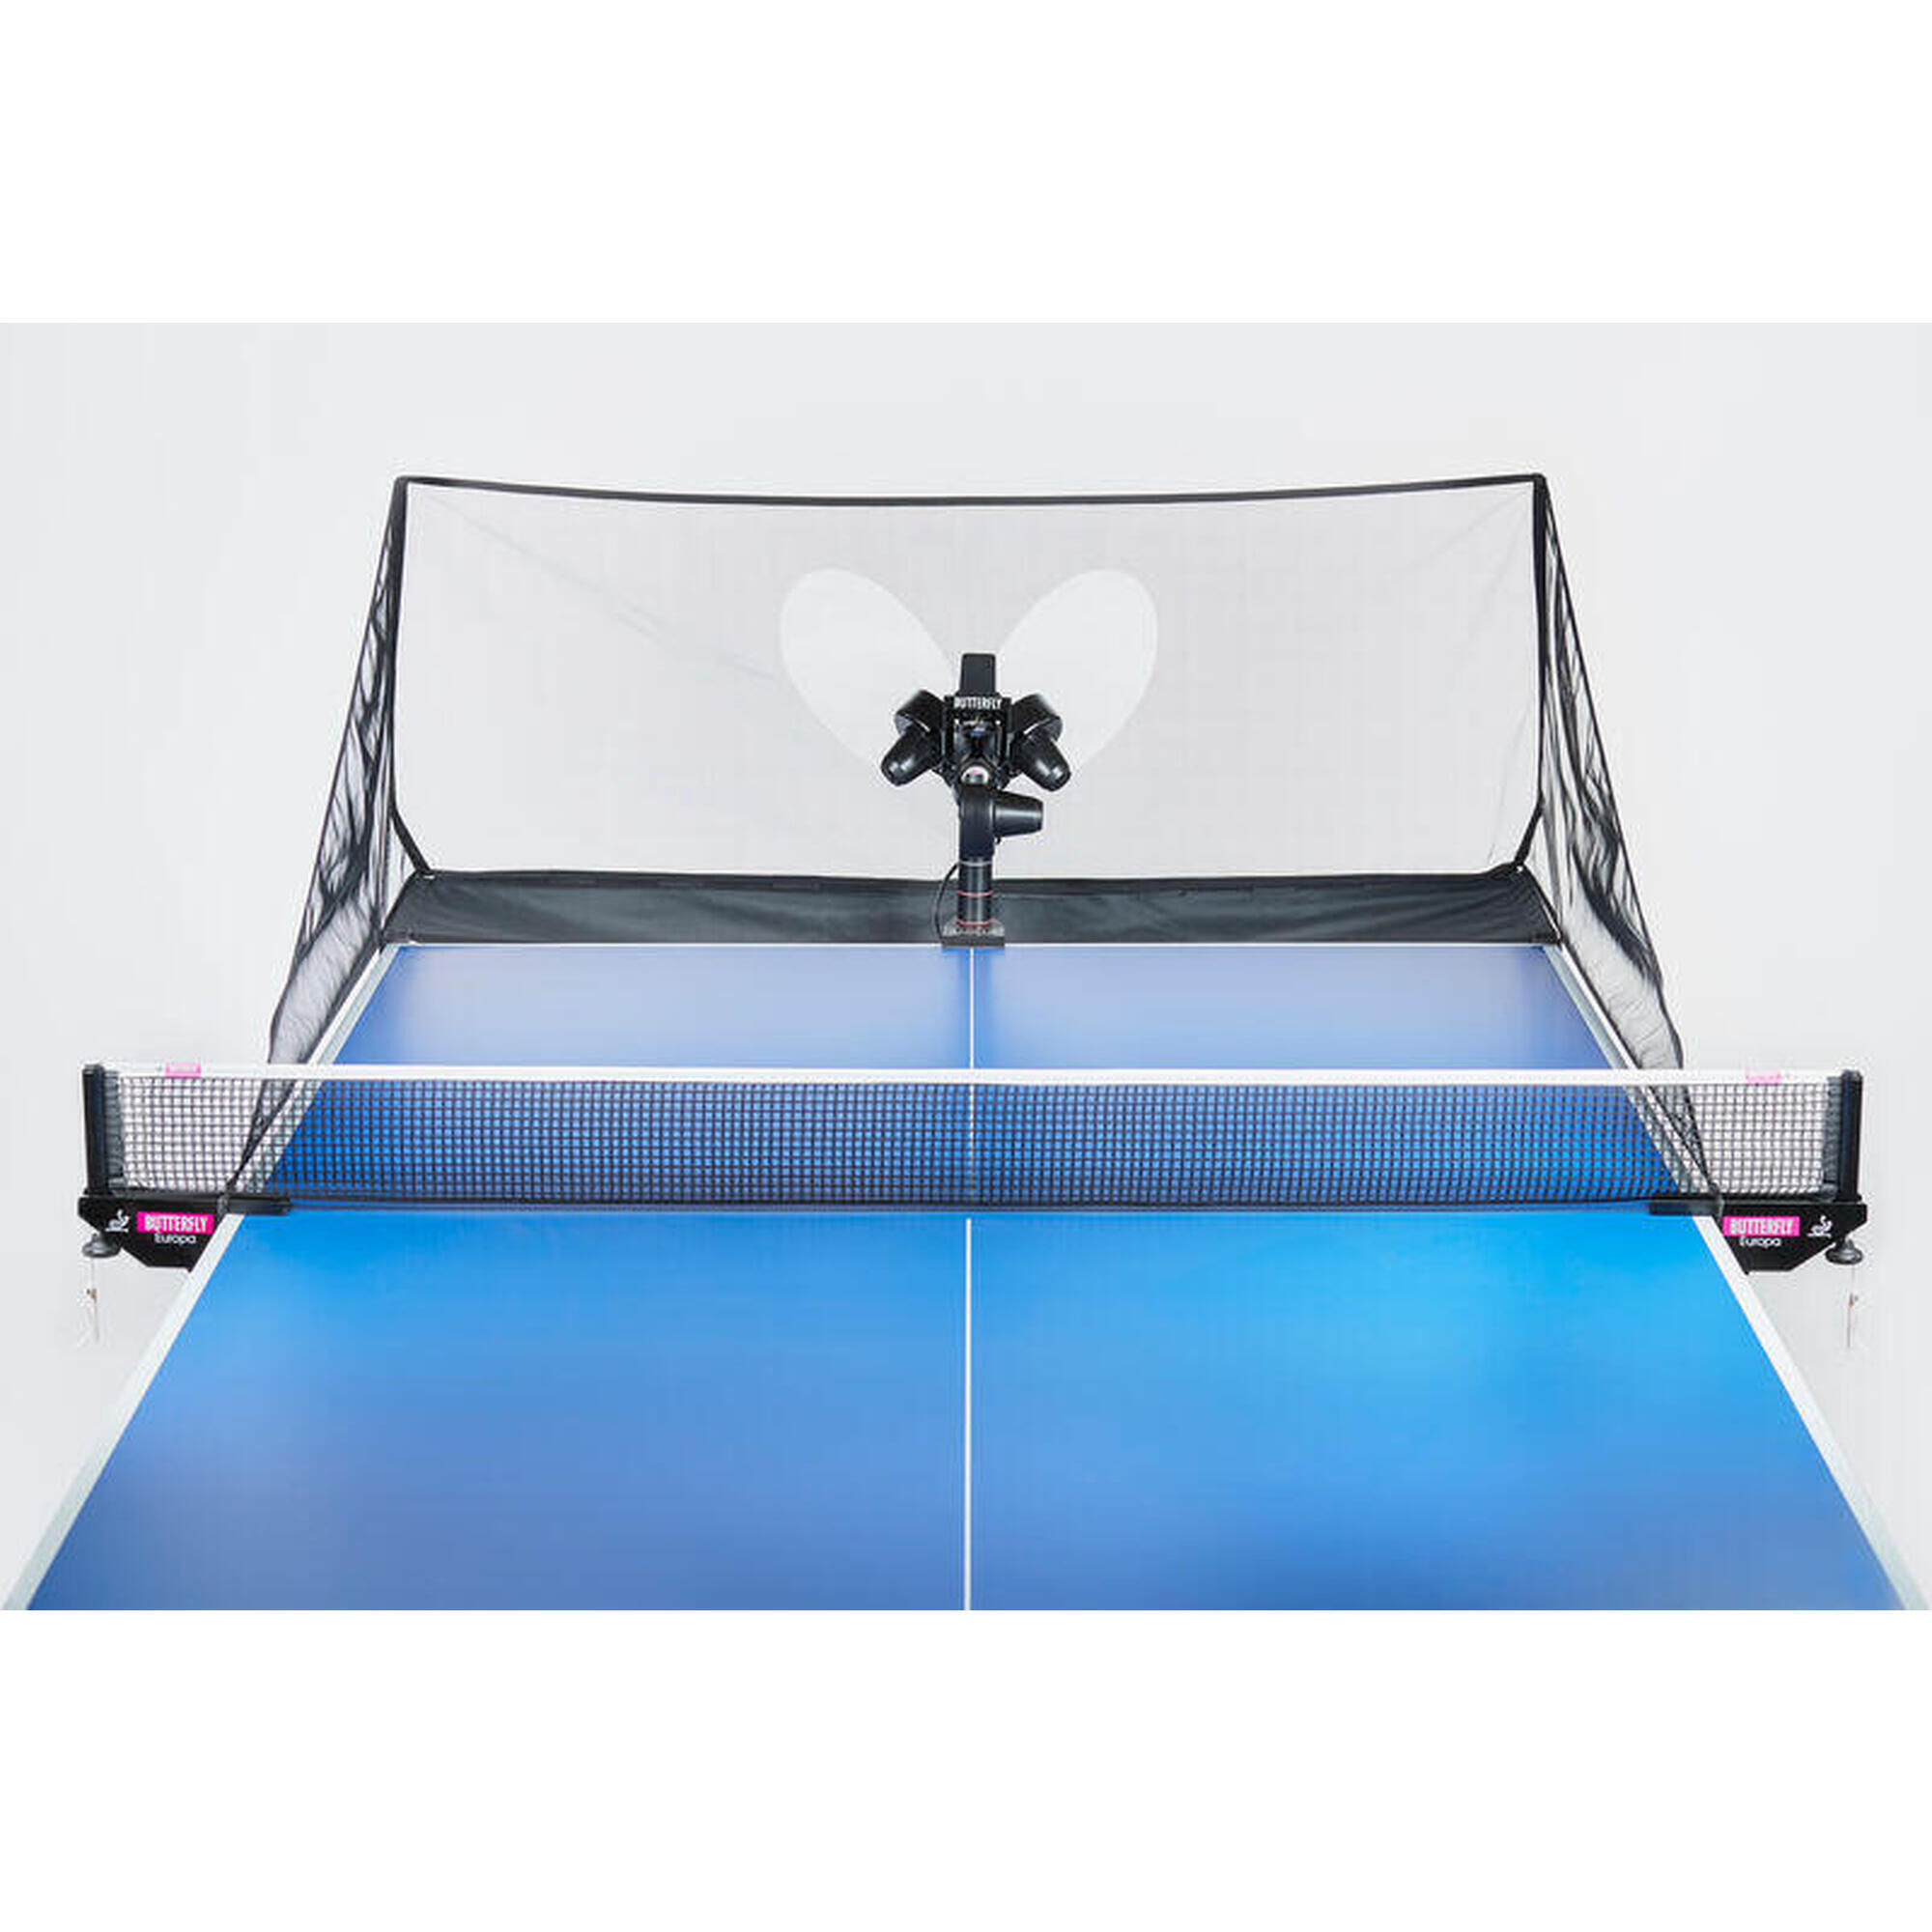 BUTTERFLY Butterfly Amicus Start Table Tennis Robot